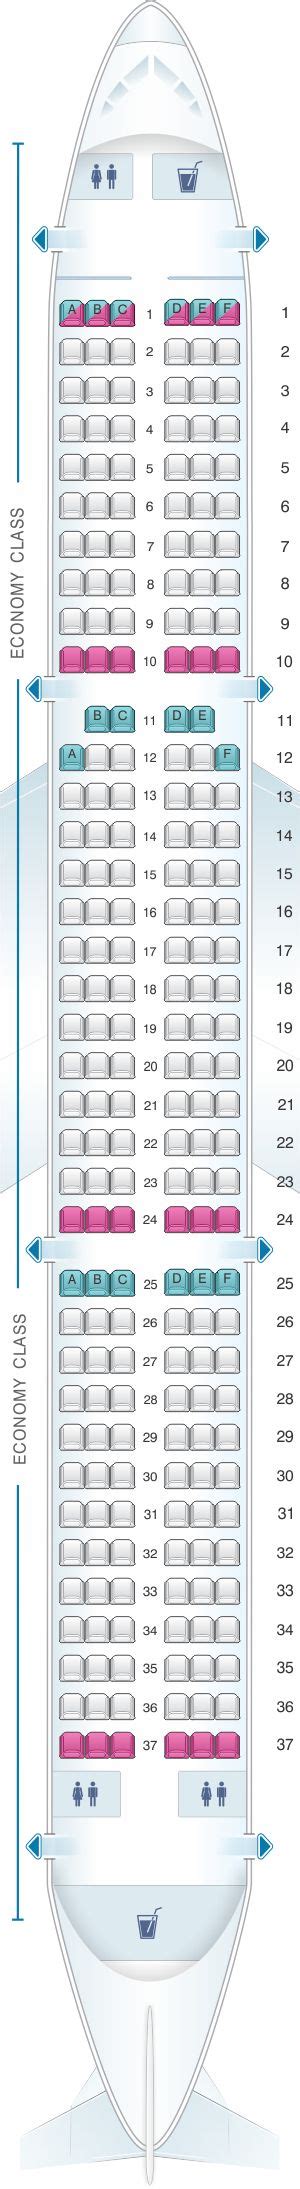 Seat Map Smartlynx Airlines Airbus A Pax Boeing Airbus Map